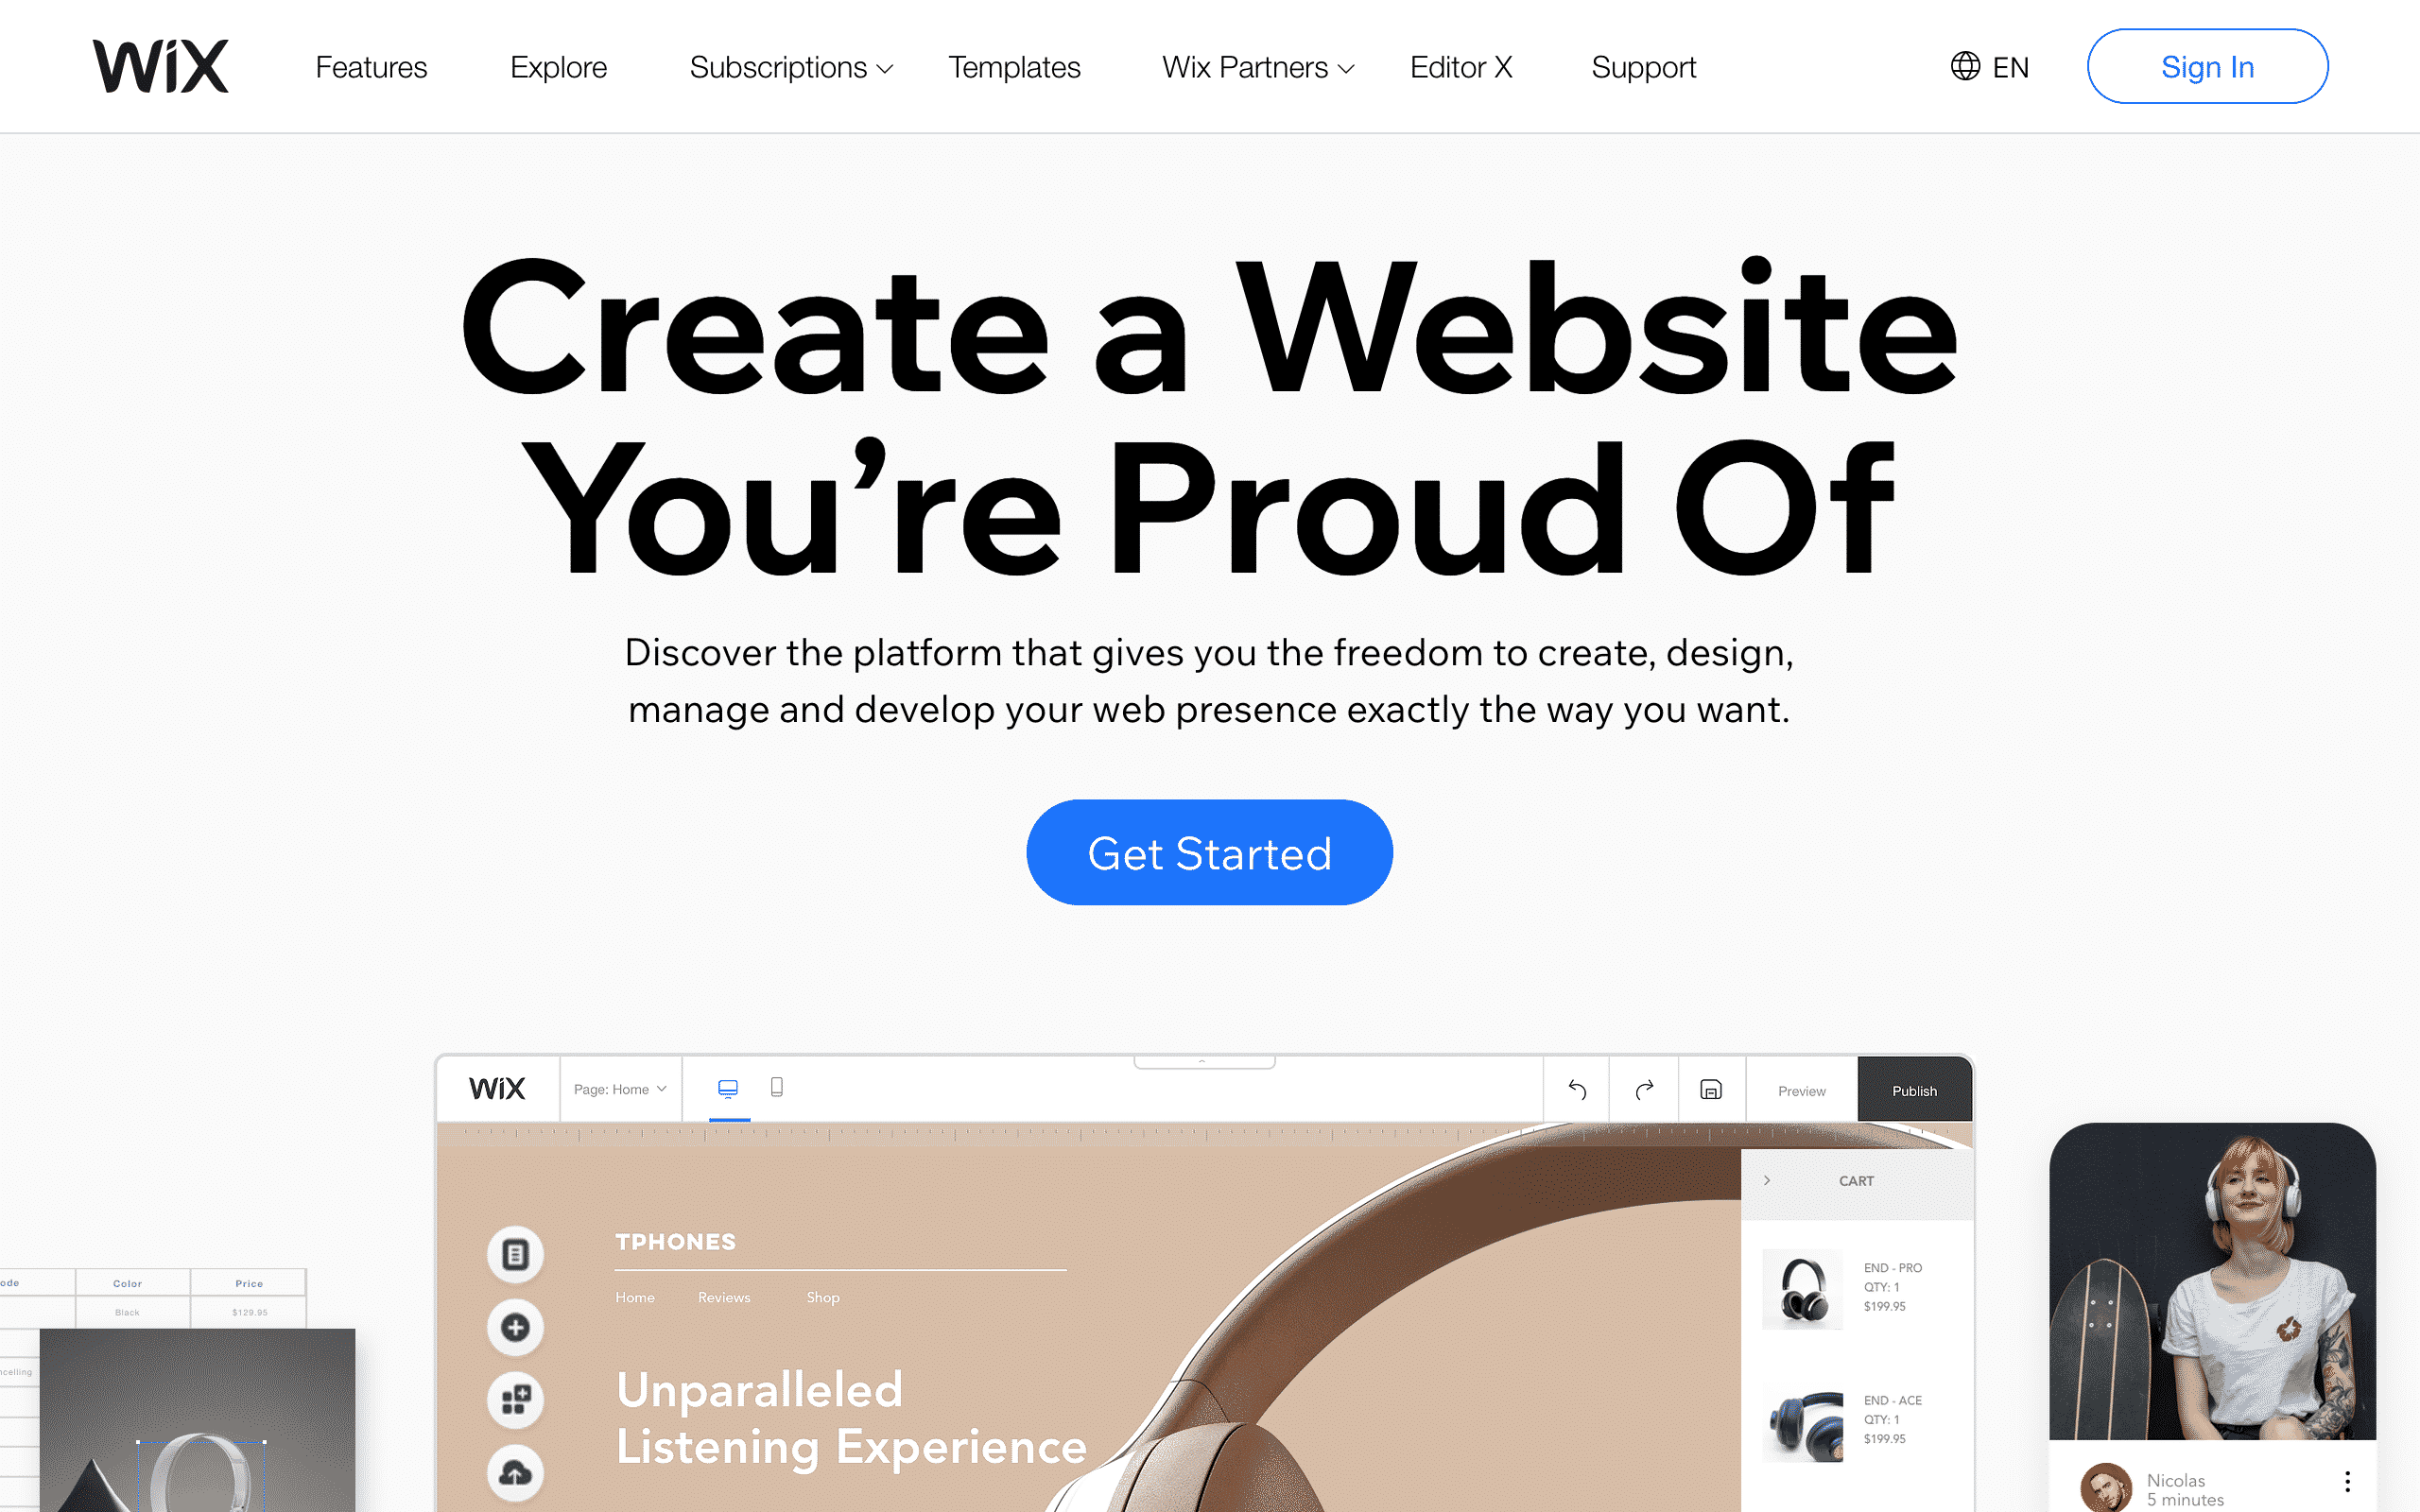 Wix claims that it will help you create a website you are proud of